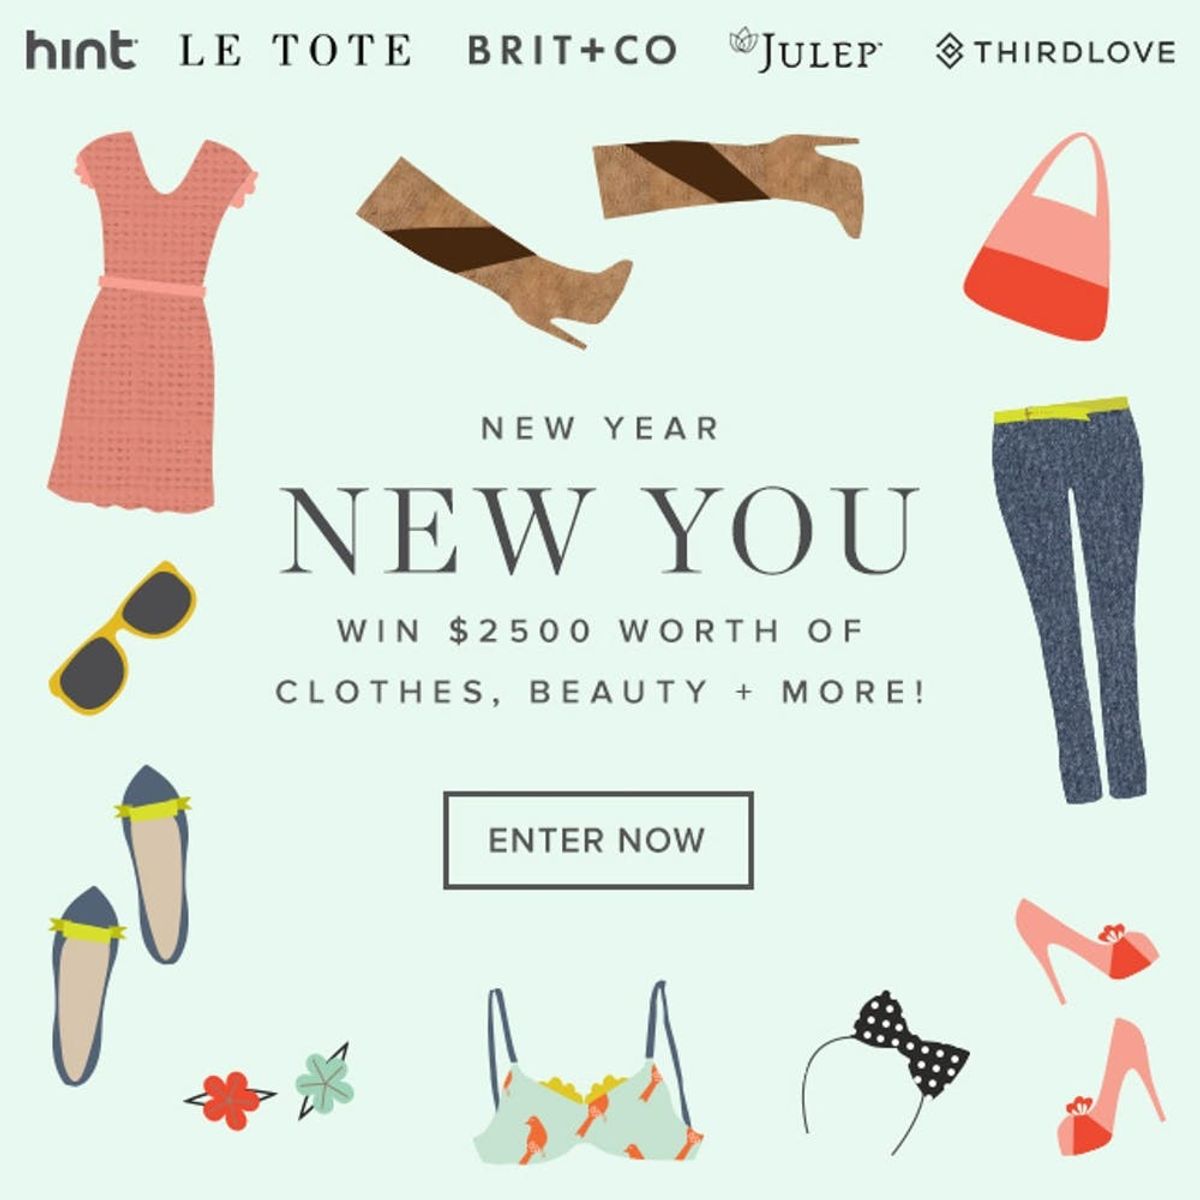 New Year, New YOU! Win $2,500 Worth of Clothes, Beauty + More!